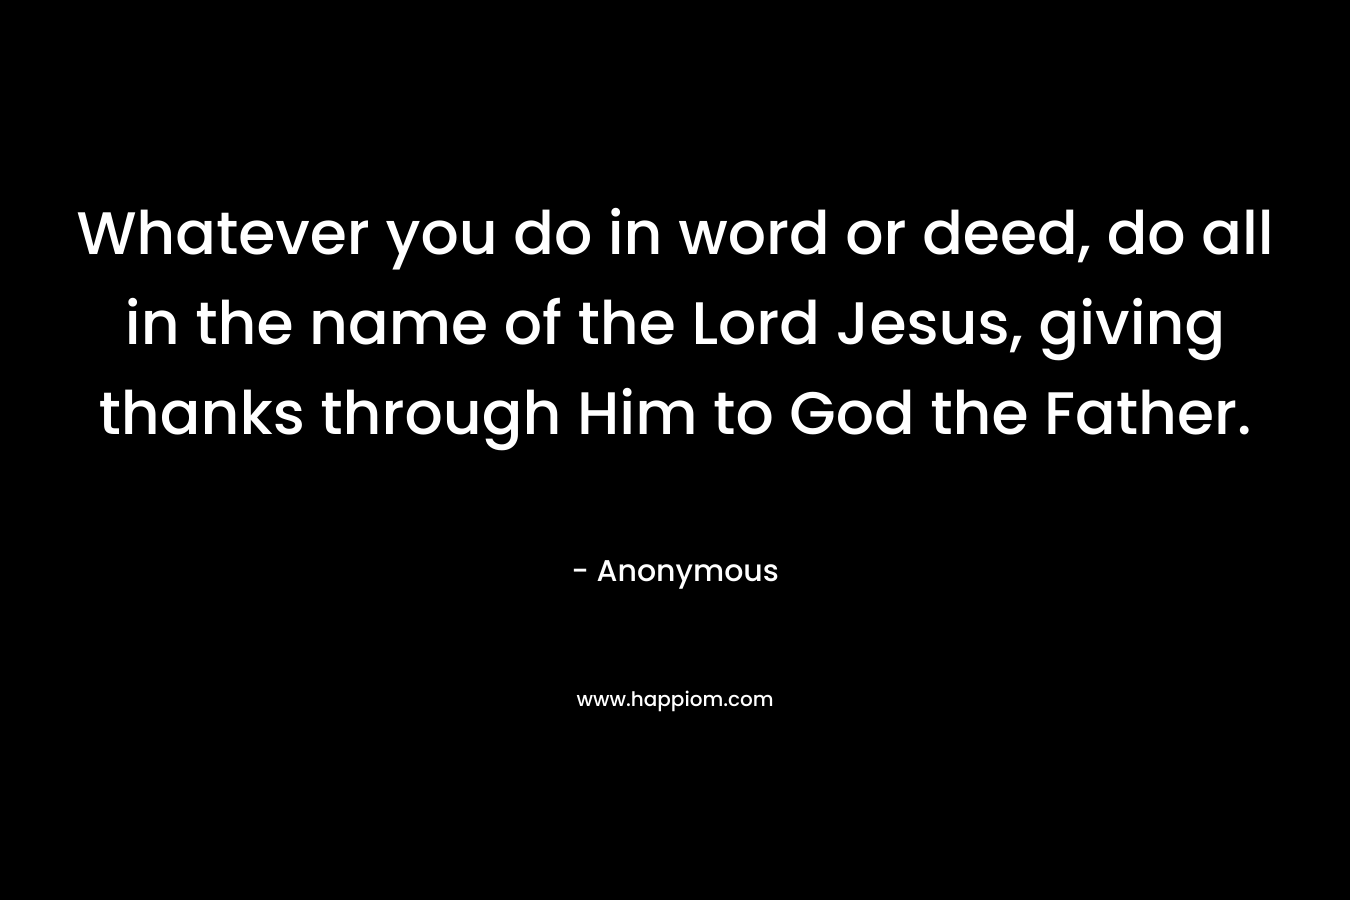 Whatever you do in word or deed, do all in the name of the Lord Jesus, giving thanks through Him to God the Father. – Anonymous